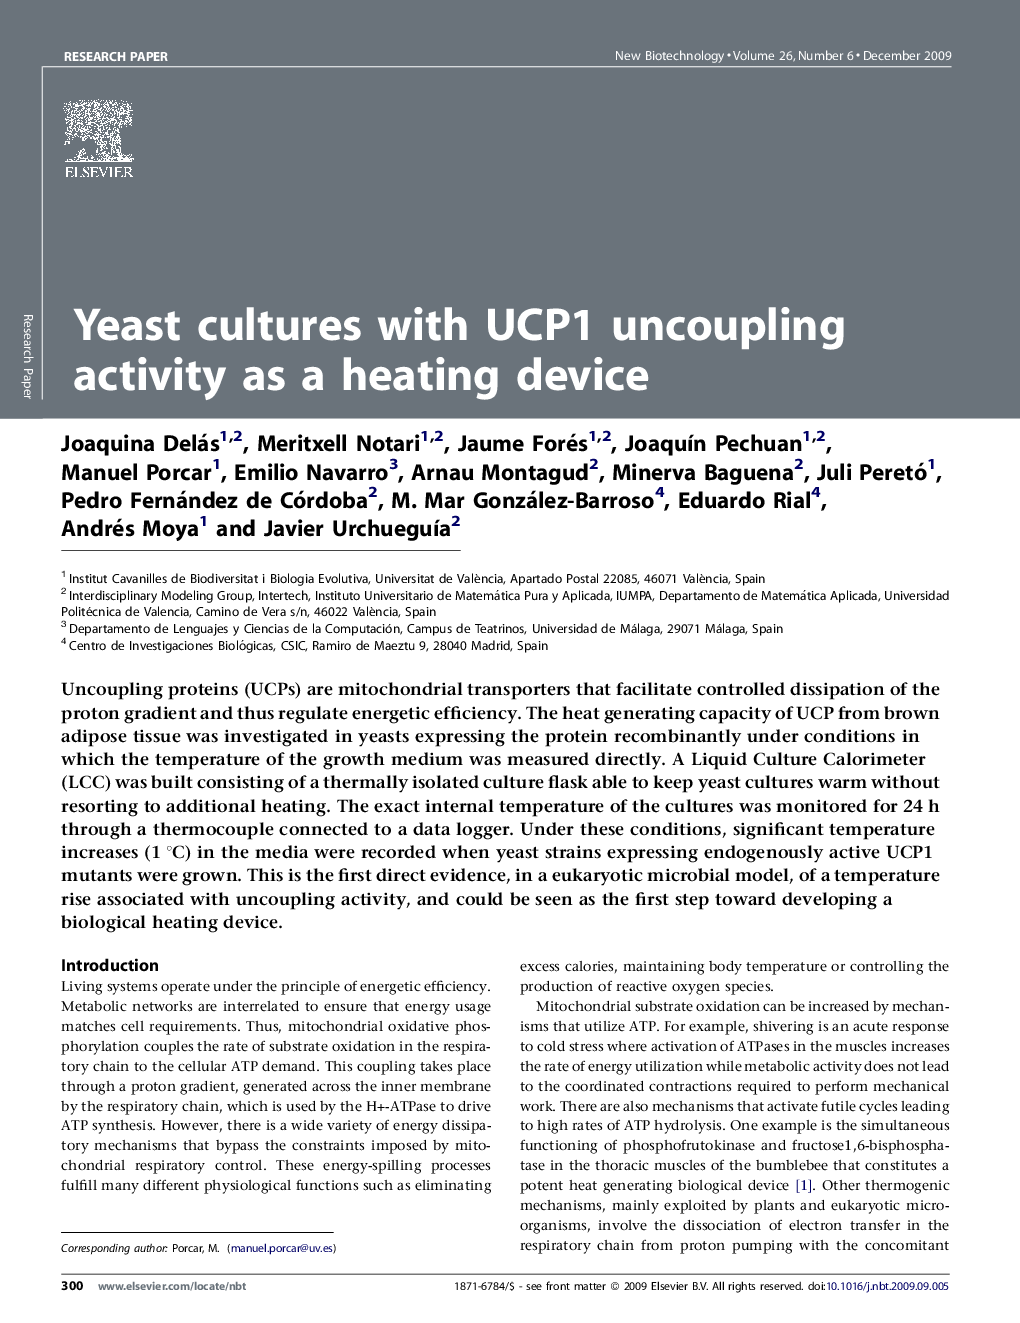 Yeast cultures with UCP1 uncoupling activity as a heating device